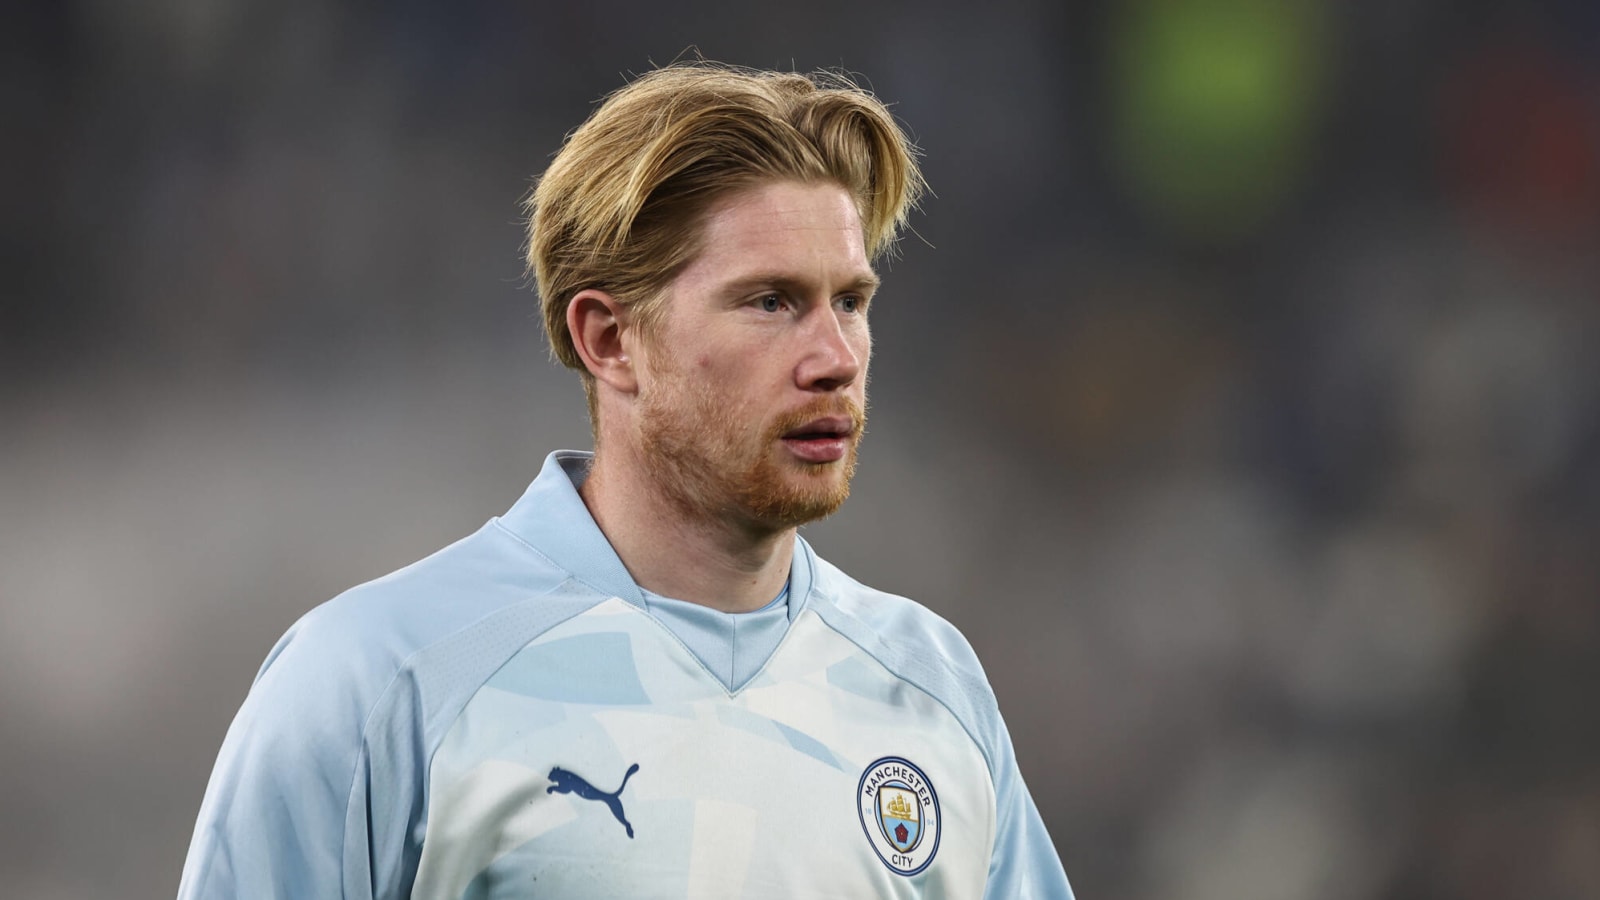 Kevin De Bruyne’s disagreement with Guardiola shows how much it means to Manchester City